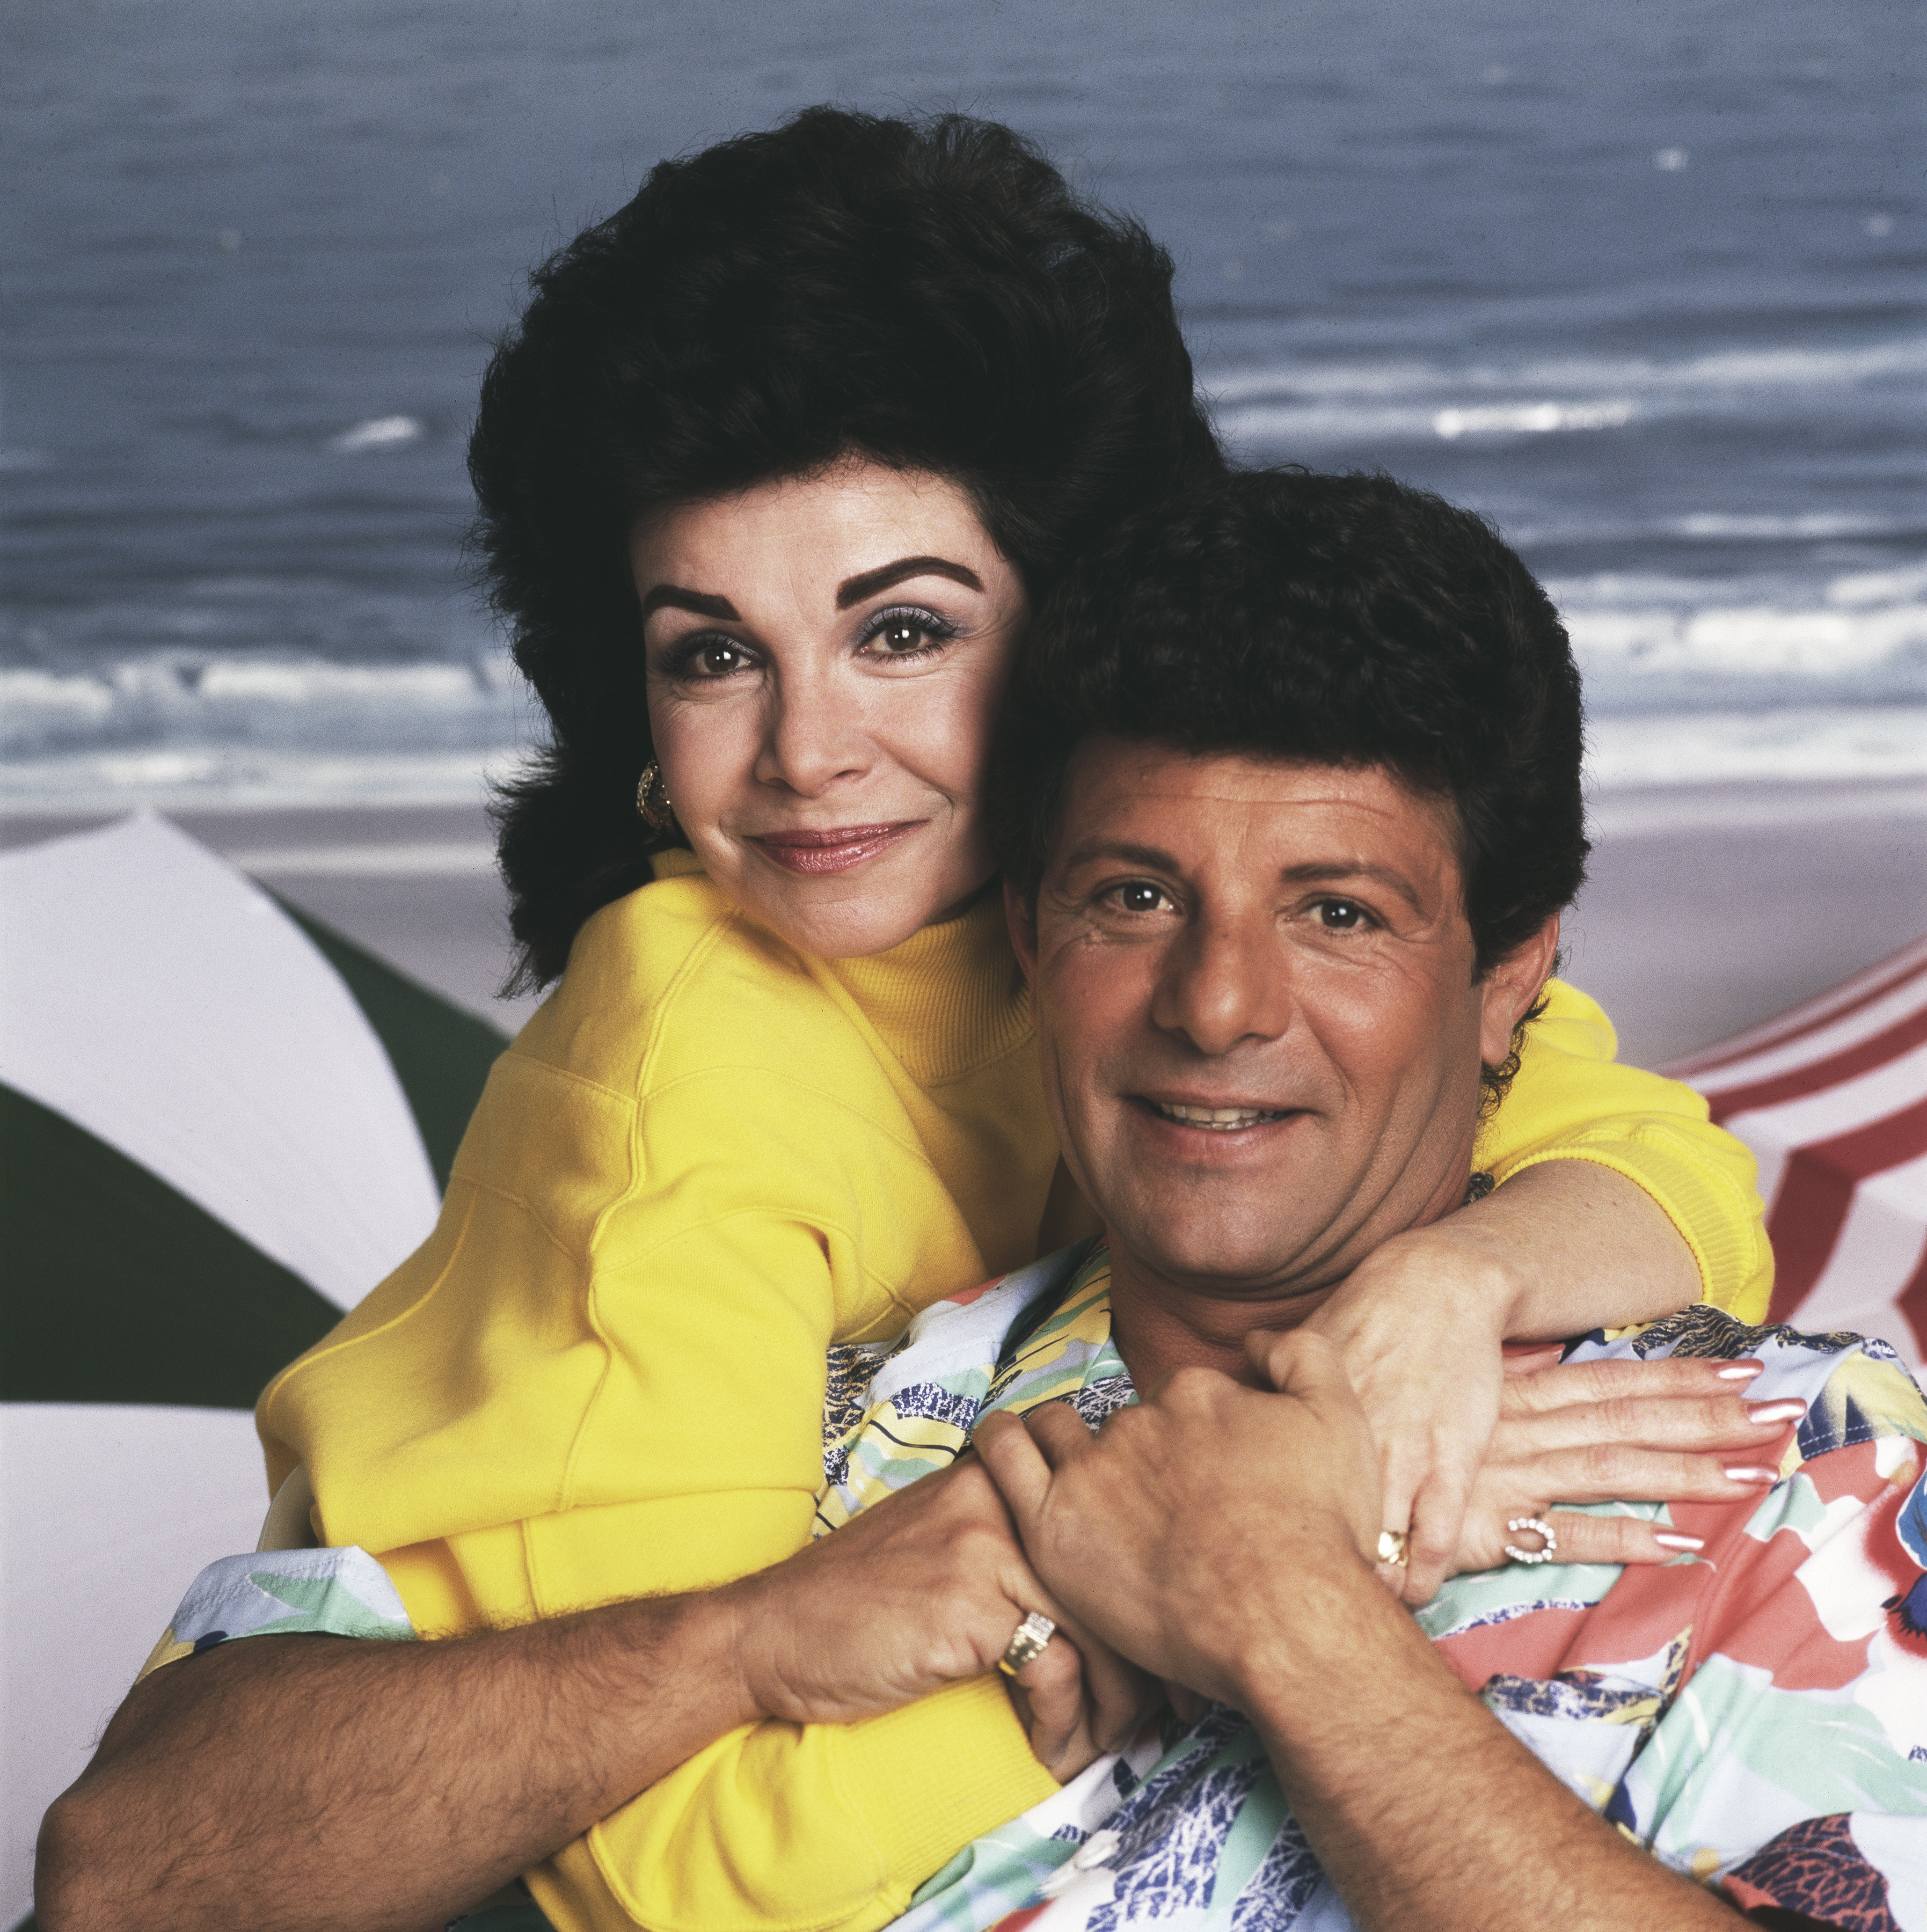 Frankie Avalon and Anette Funicello circa 1987. | Source: Getty Images